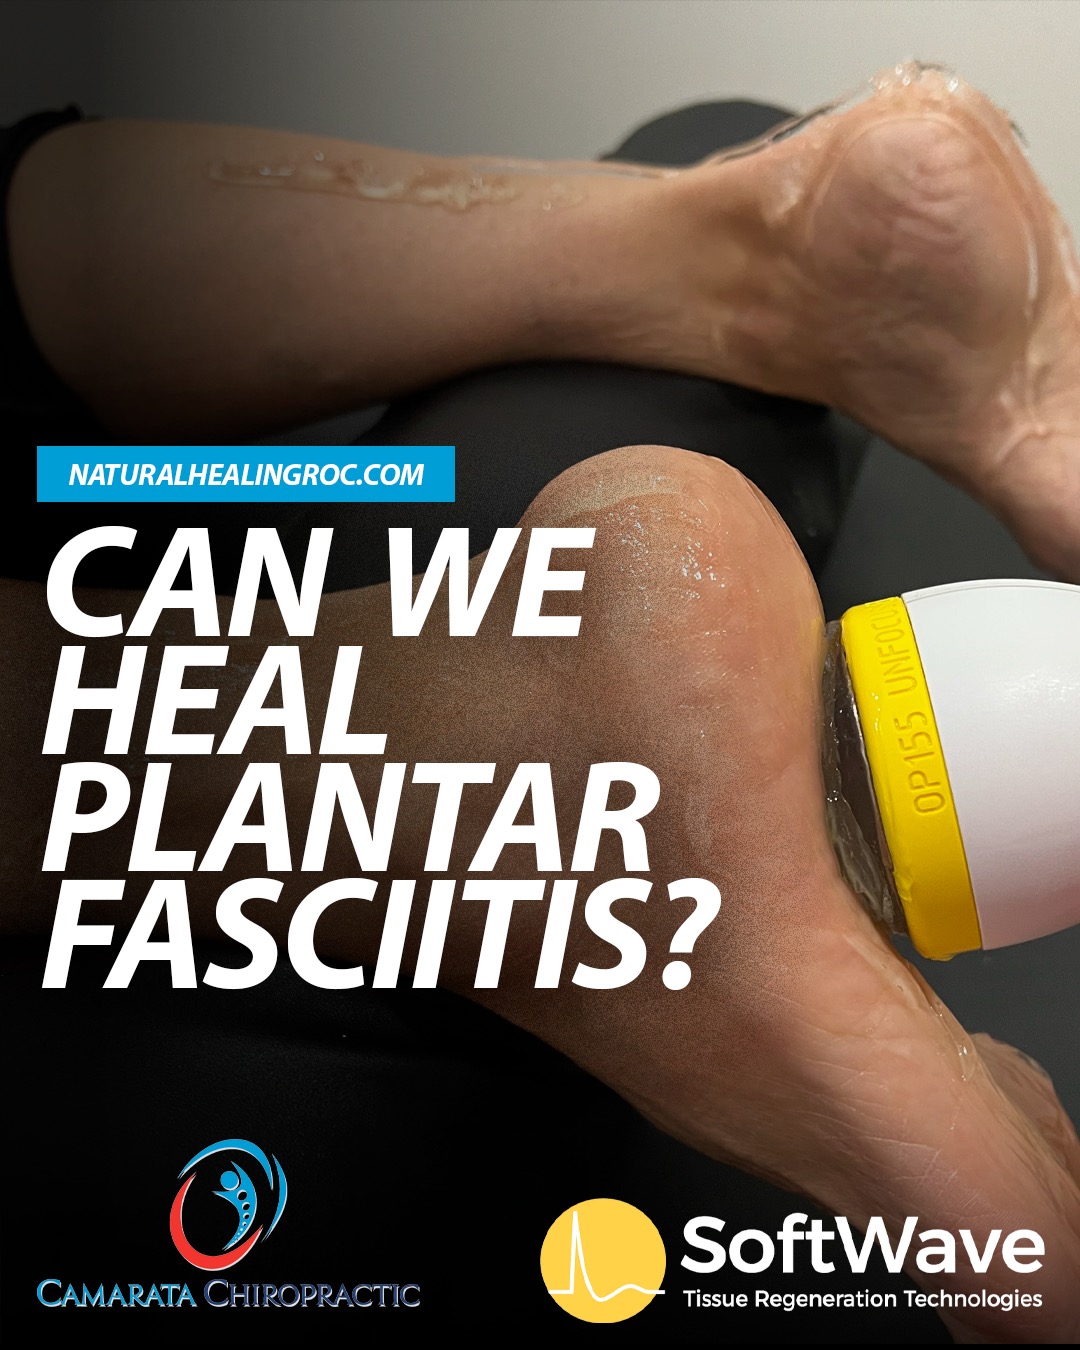 Can We Heal Plantar Fasciitis?! Exploring Solutions with SoftWave Tissue Regeneration Technology at Camarata Chiropractic & Wellness